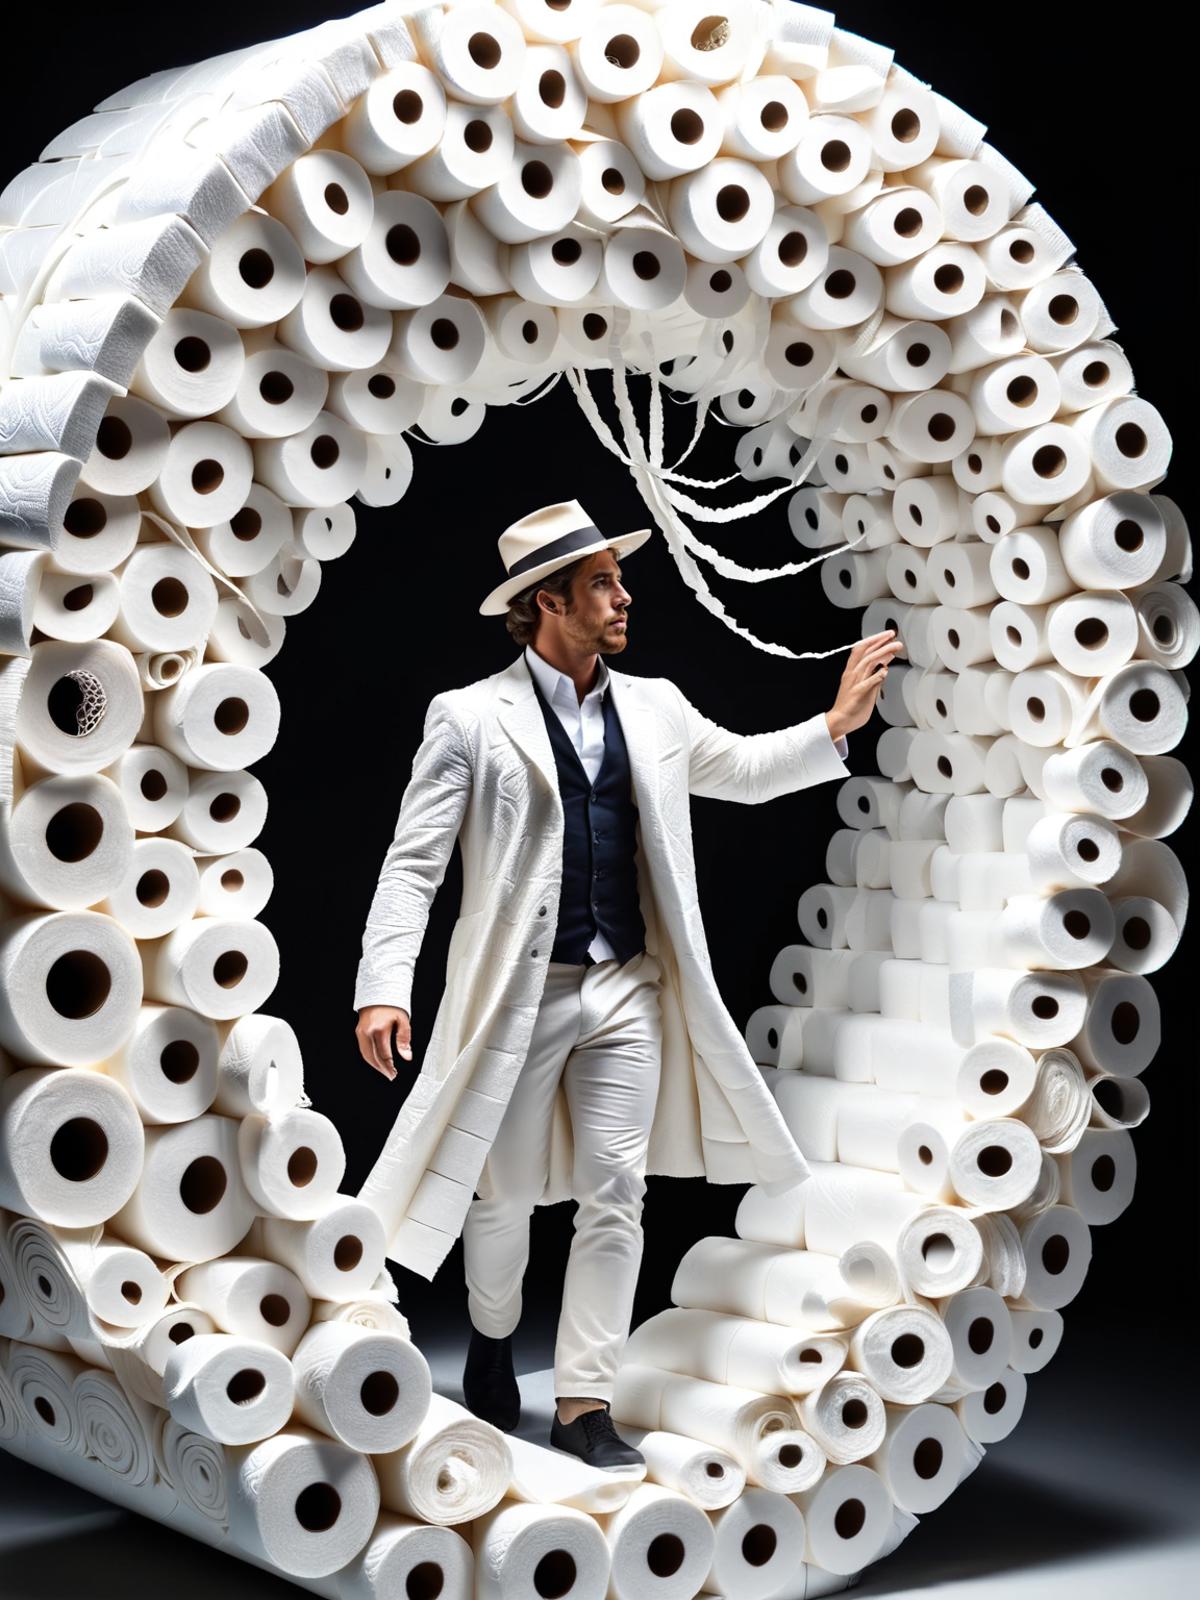 Man in a white suit and hat standing in front of a giant toilet paper roll.